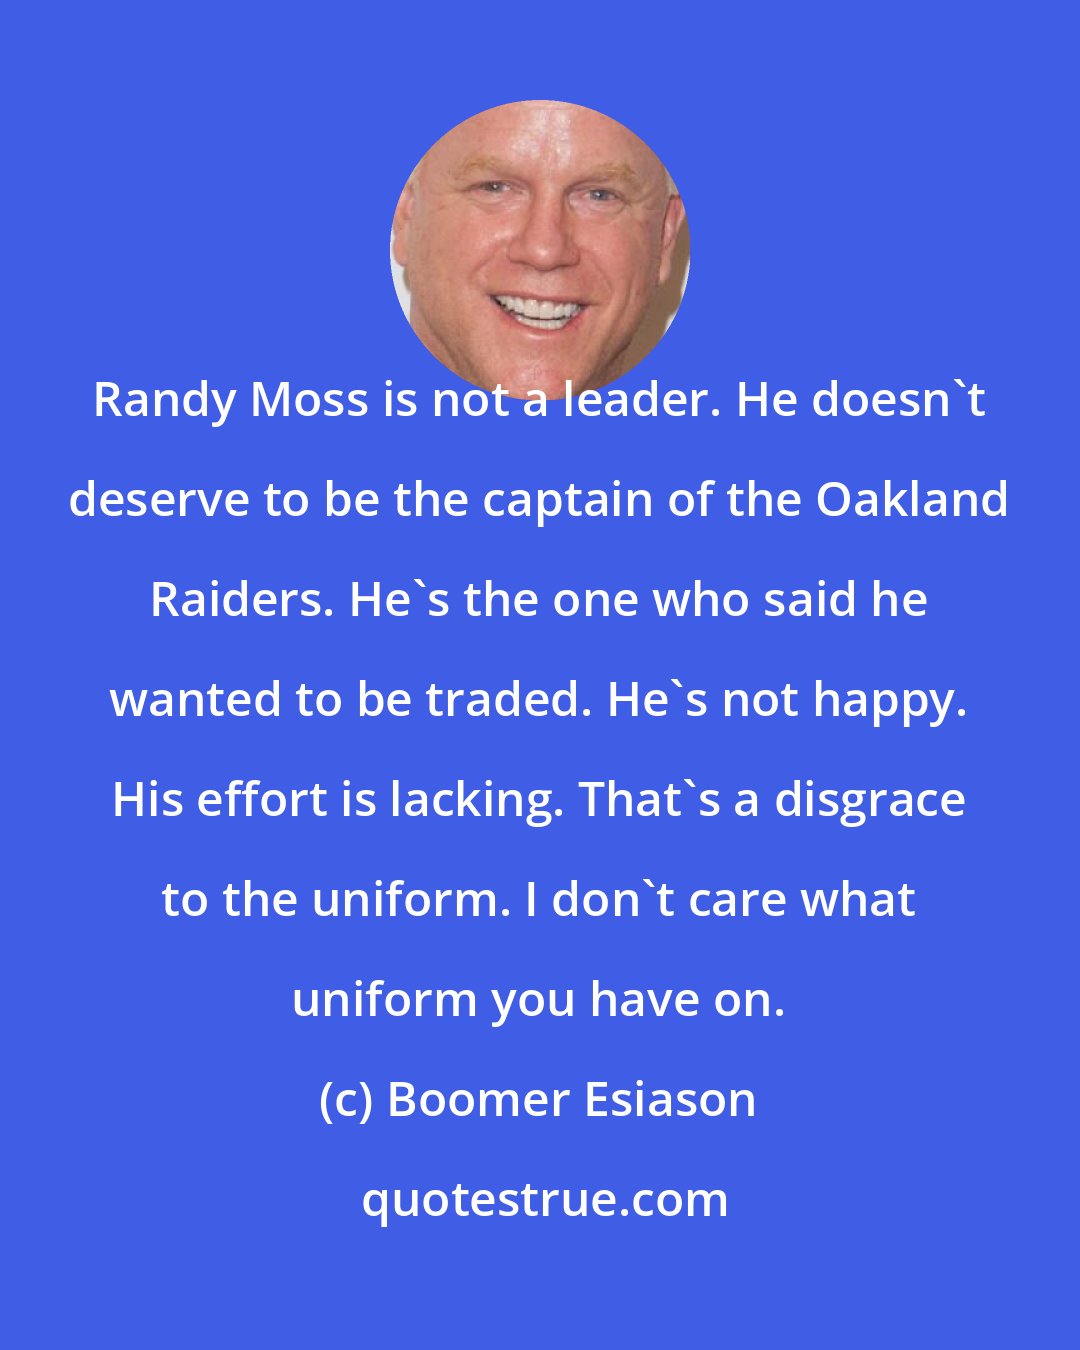 Boomer Esiason: Randy Moss is not a leader. He doesn't deserve to be the captain of the Oakland Raiders. He's the one who said he wanted to be traded. He's not happy. His effort is lacking. That's a disgrace to the uniform. I don't care what uniform you have on.